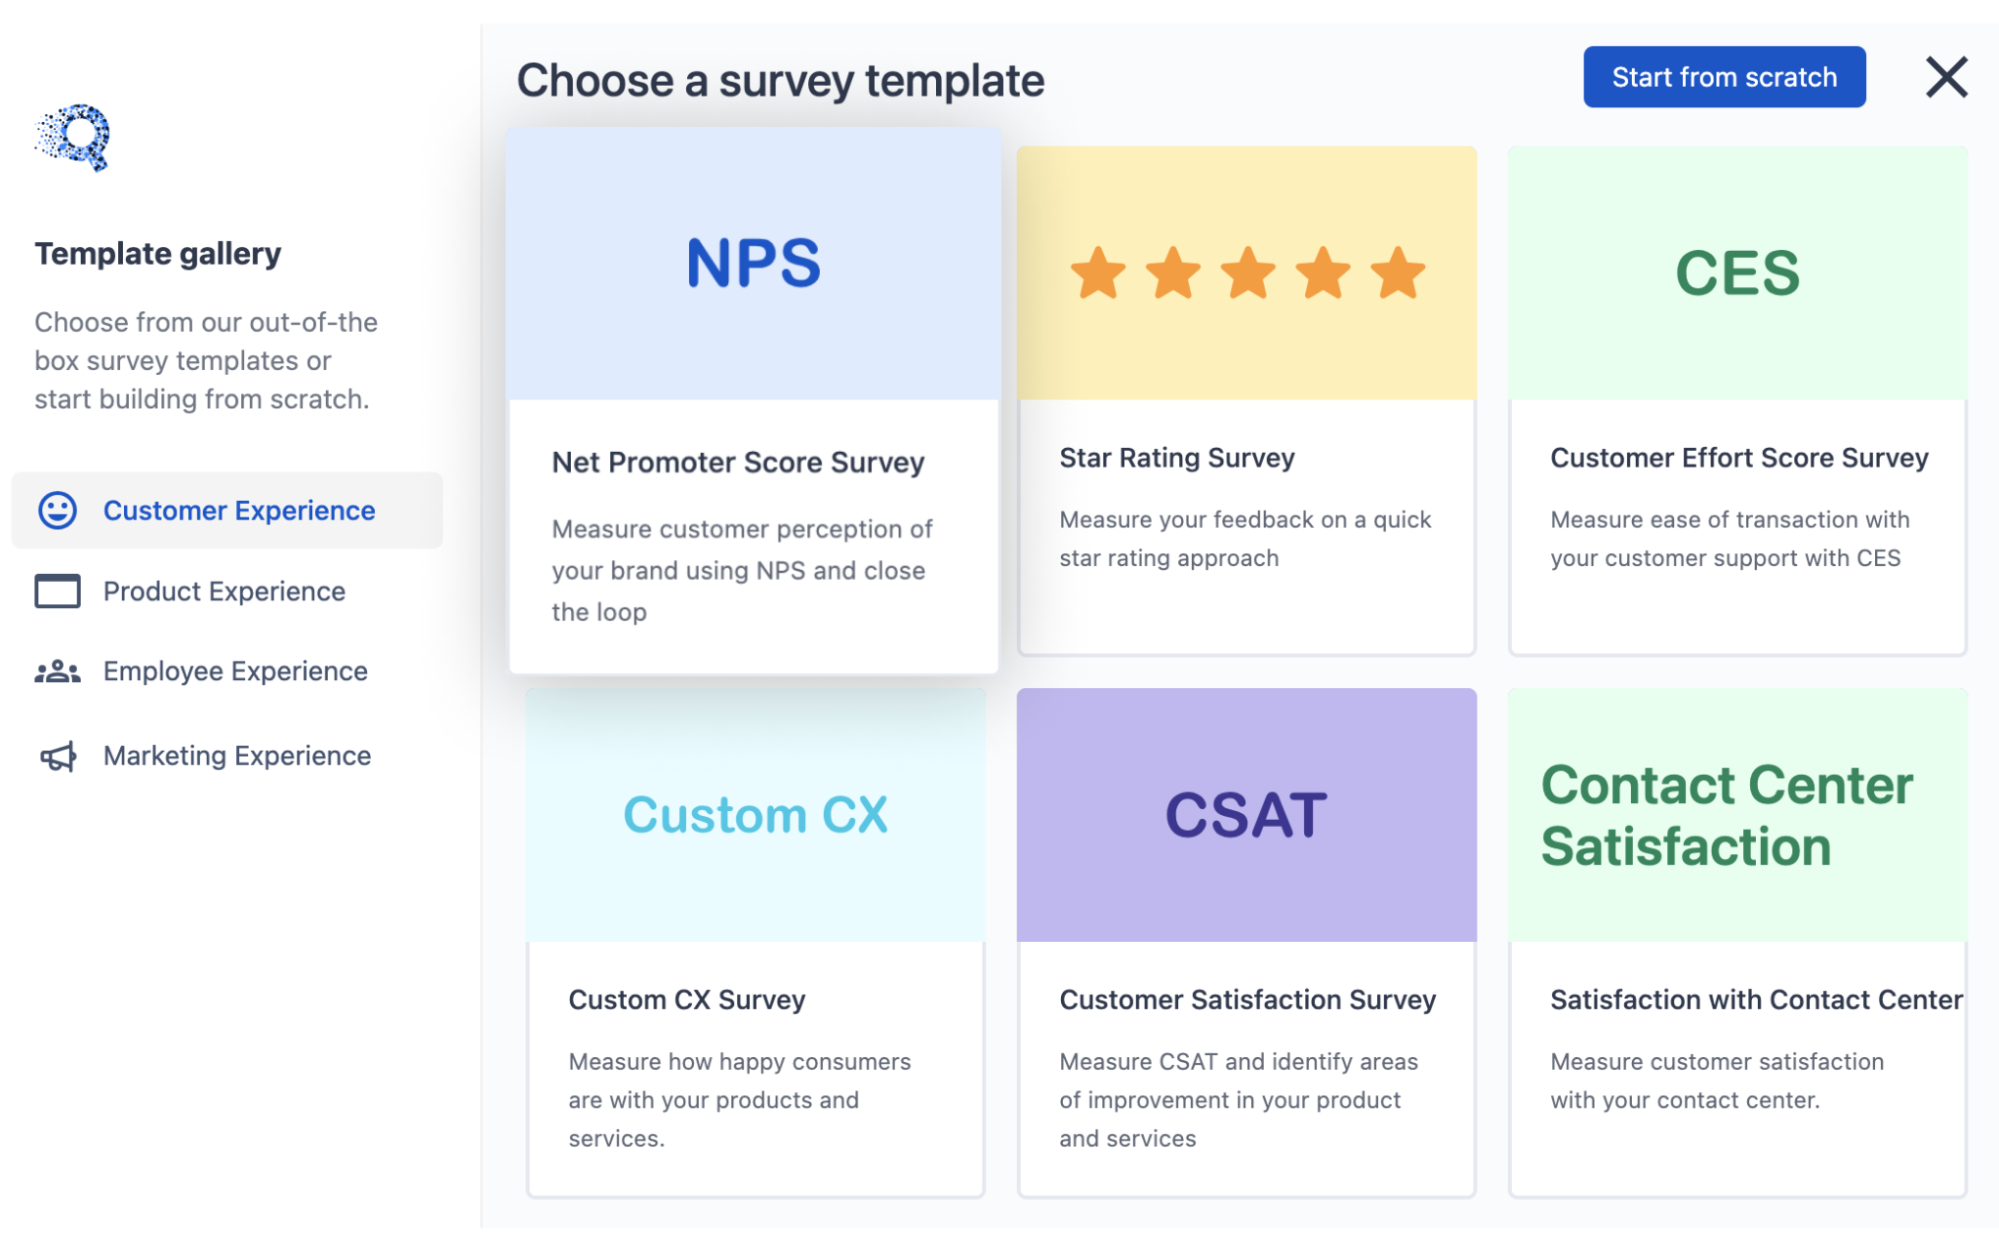 This is the image of the Customer experience survey templates with different types surveys - NPS, star rating survey, CES, Customer CX, CSAT, and Contact center satisfaction survey.